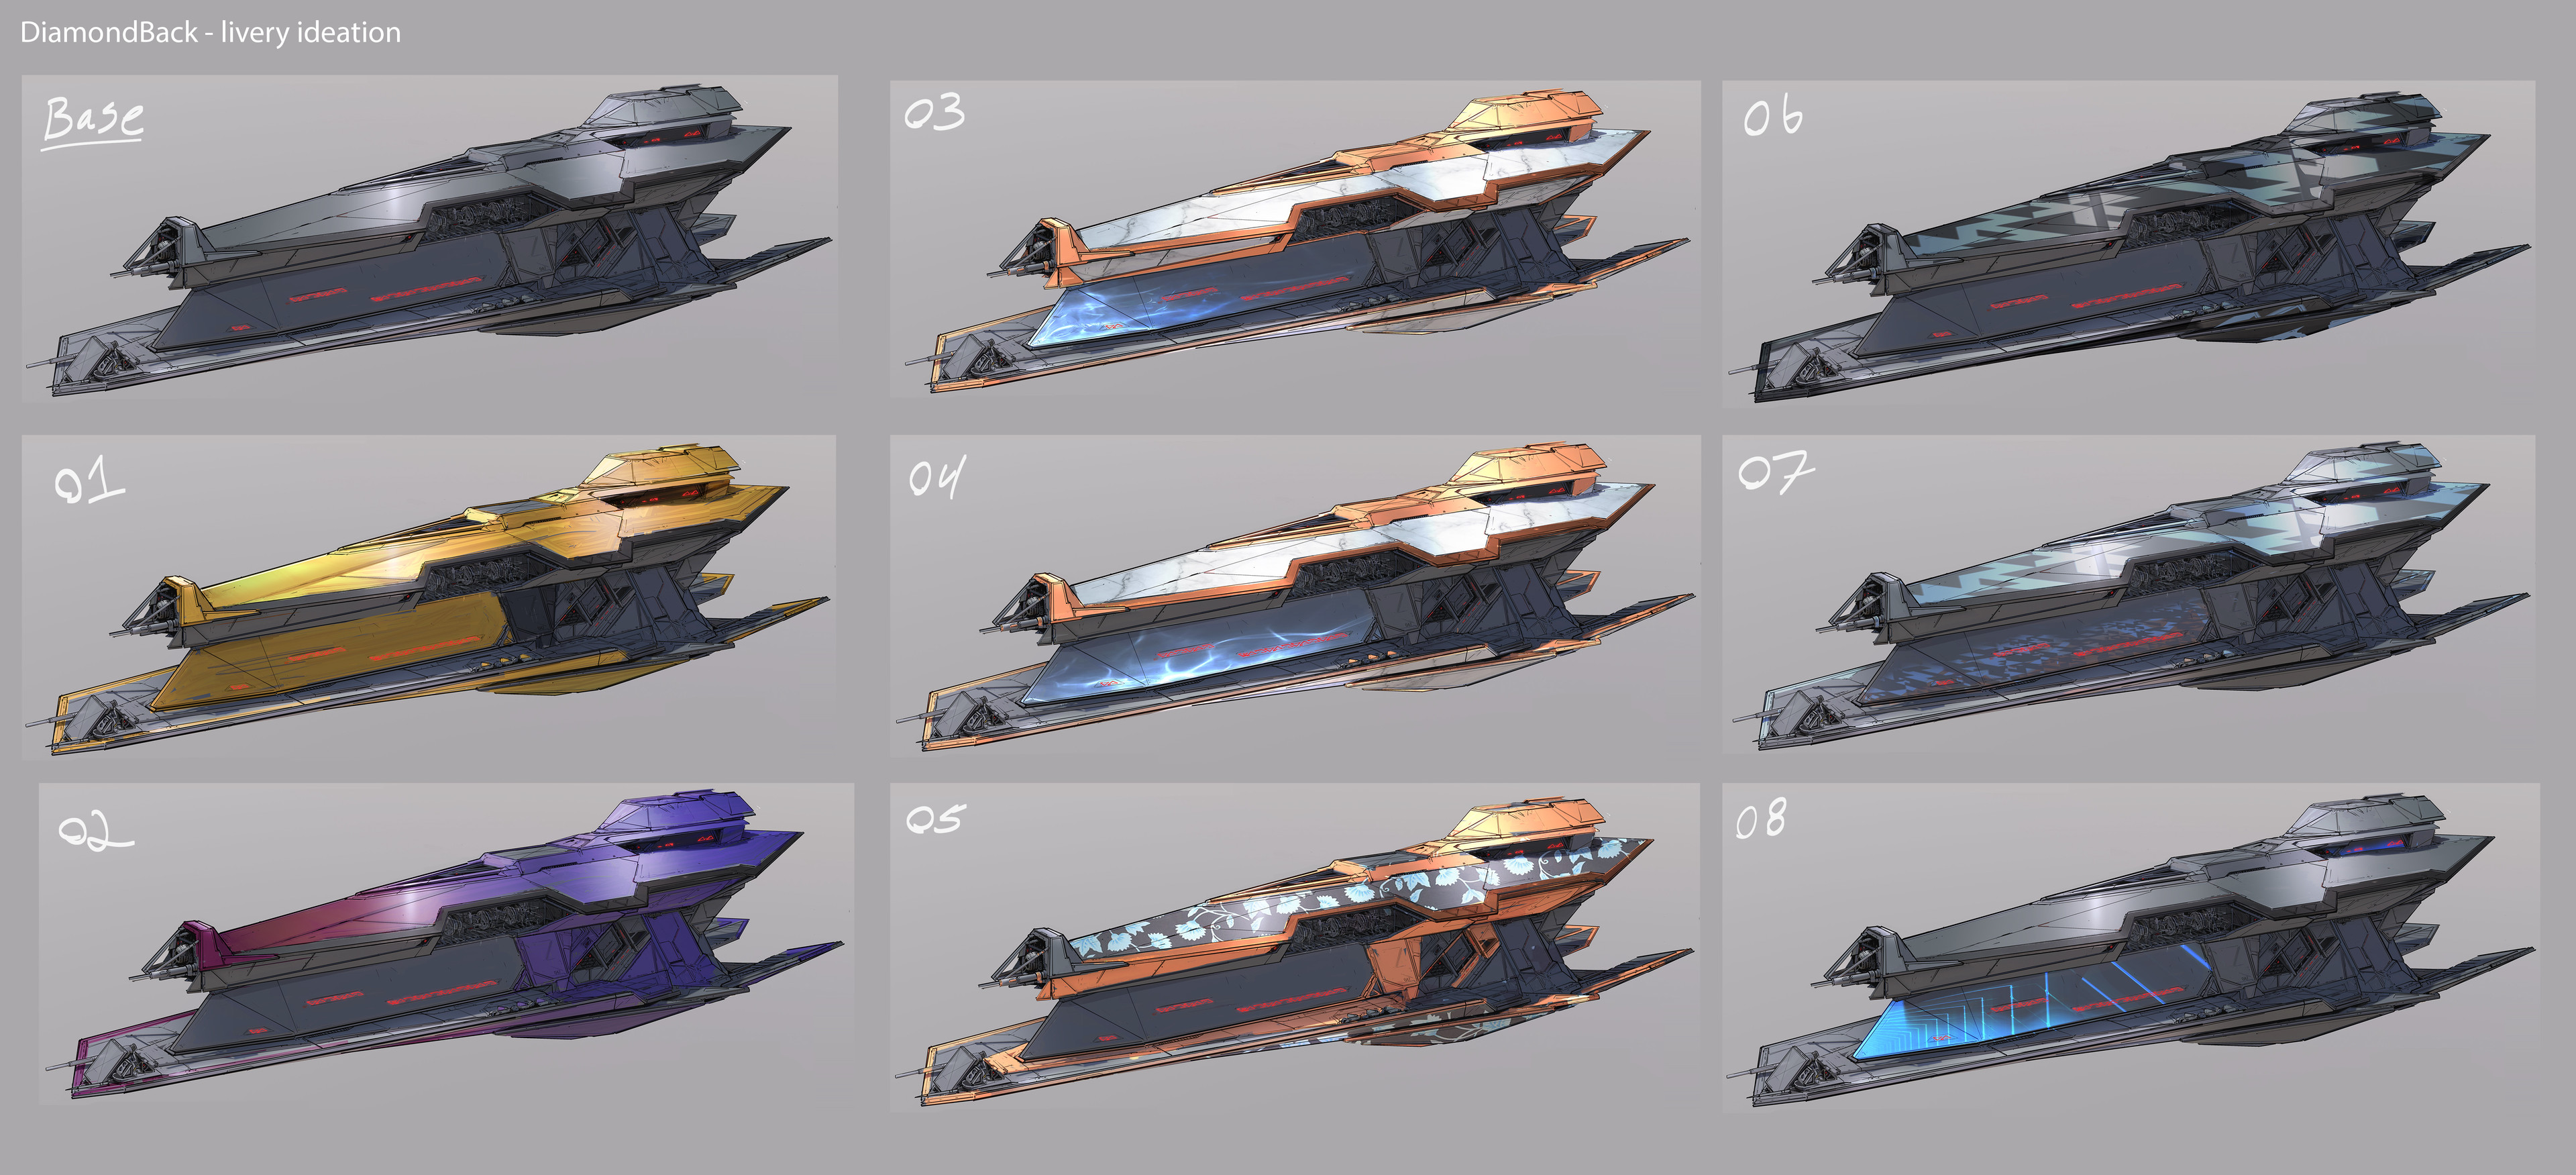 A first quick ideation of what 'liveries' or skins could look like on the Diamondback ship. This was also meant to help Tech establish boundaries for the ship shader system and how UVs would be handled.